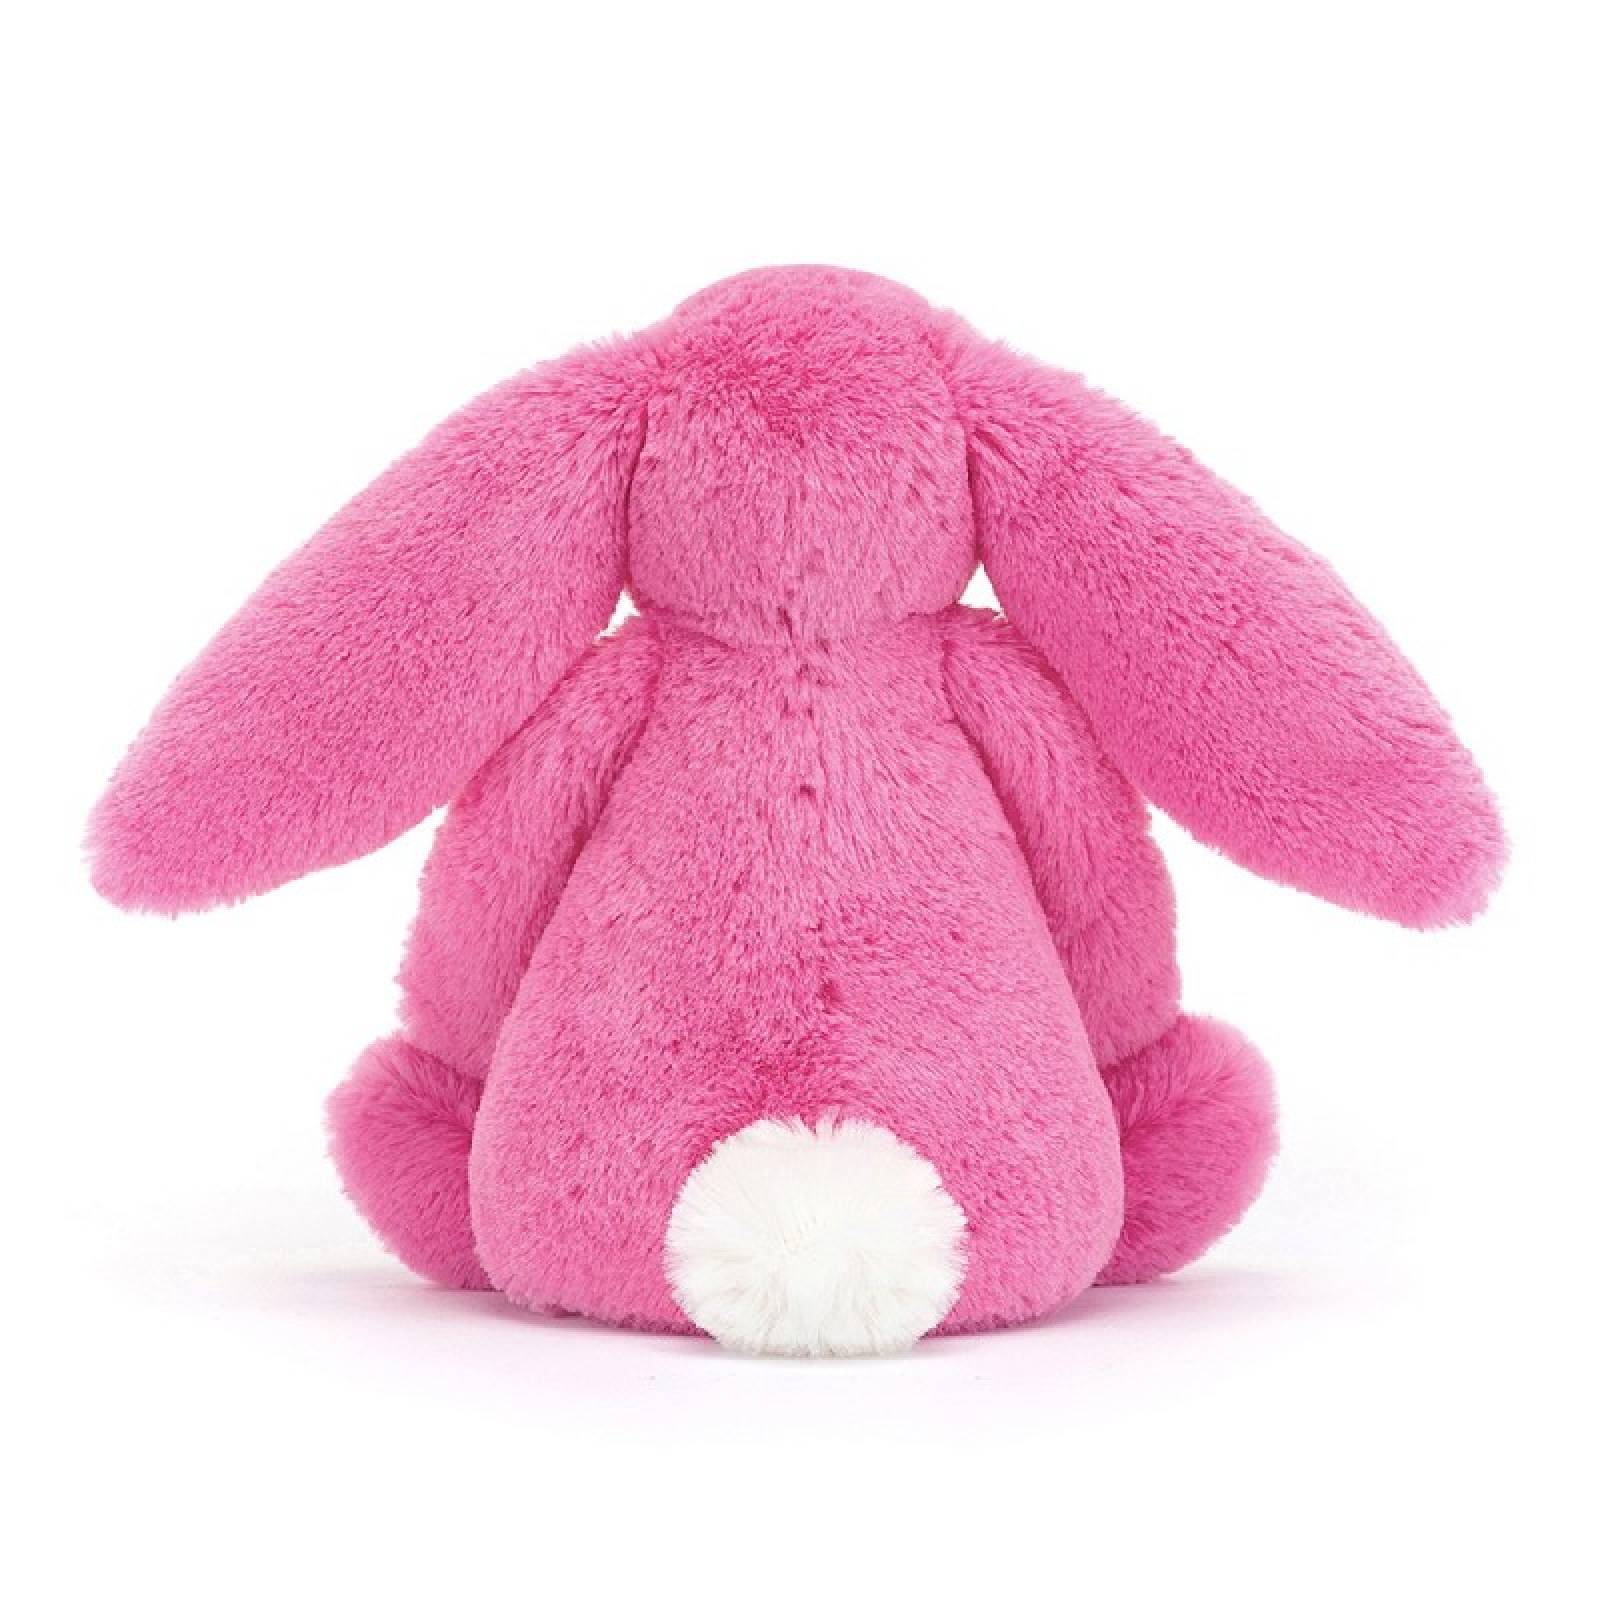 Small Bashful Bunny In Hot Pink Soft Toy By Jellycat 0+ thumbnails